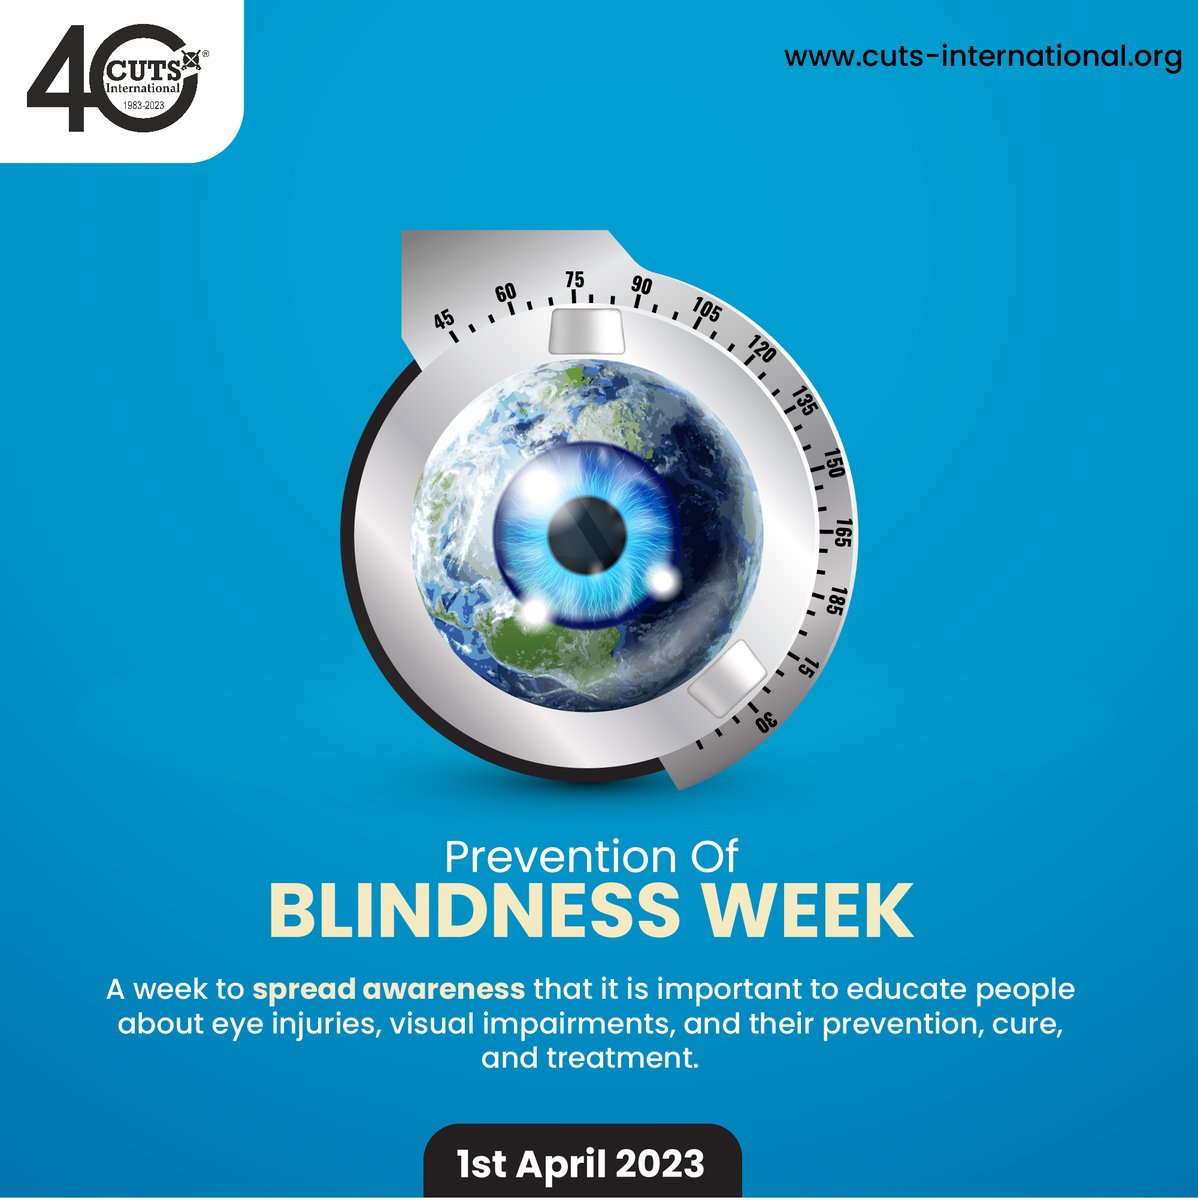 Psm_cuts: RT @CUTS_CHD: Healthy eyes, healthy life.

Let’s raise awareness during Prevention of Blindness Week.

#PreventionOfBlindnessWeek #SpreadAwareness #Support #CUTS #CutsInternational

@psm_cuts @bc_cuts @gcheriyan @drpreetivats @ujjwal1841 @Sures…